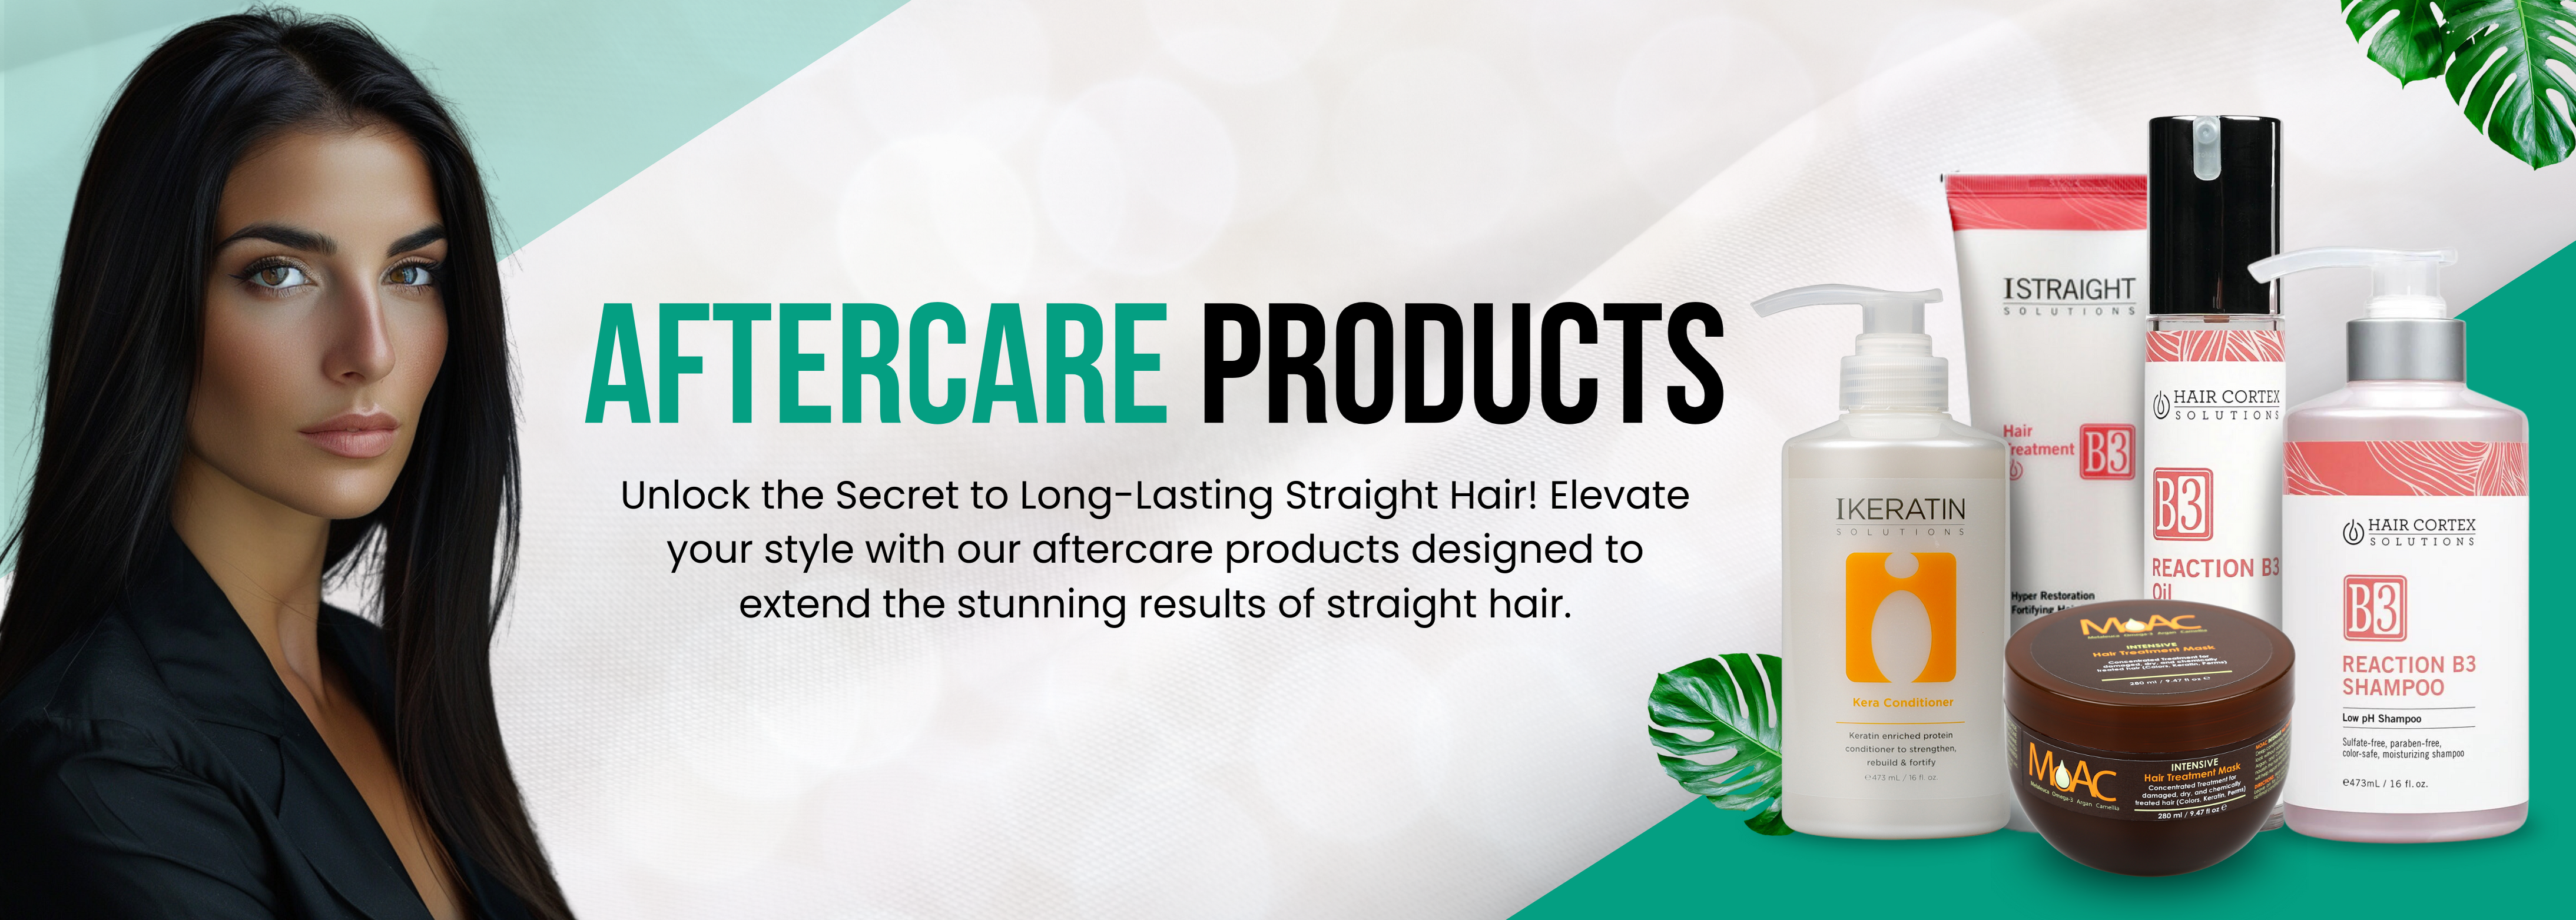 istraight haircare solutions